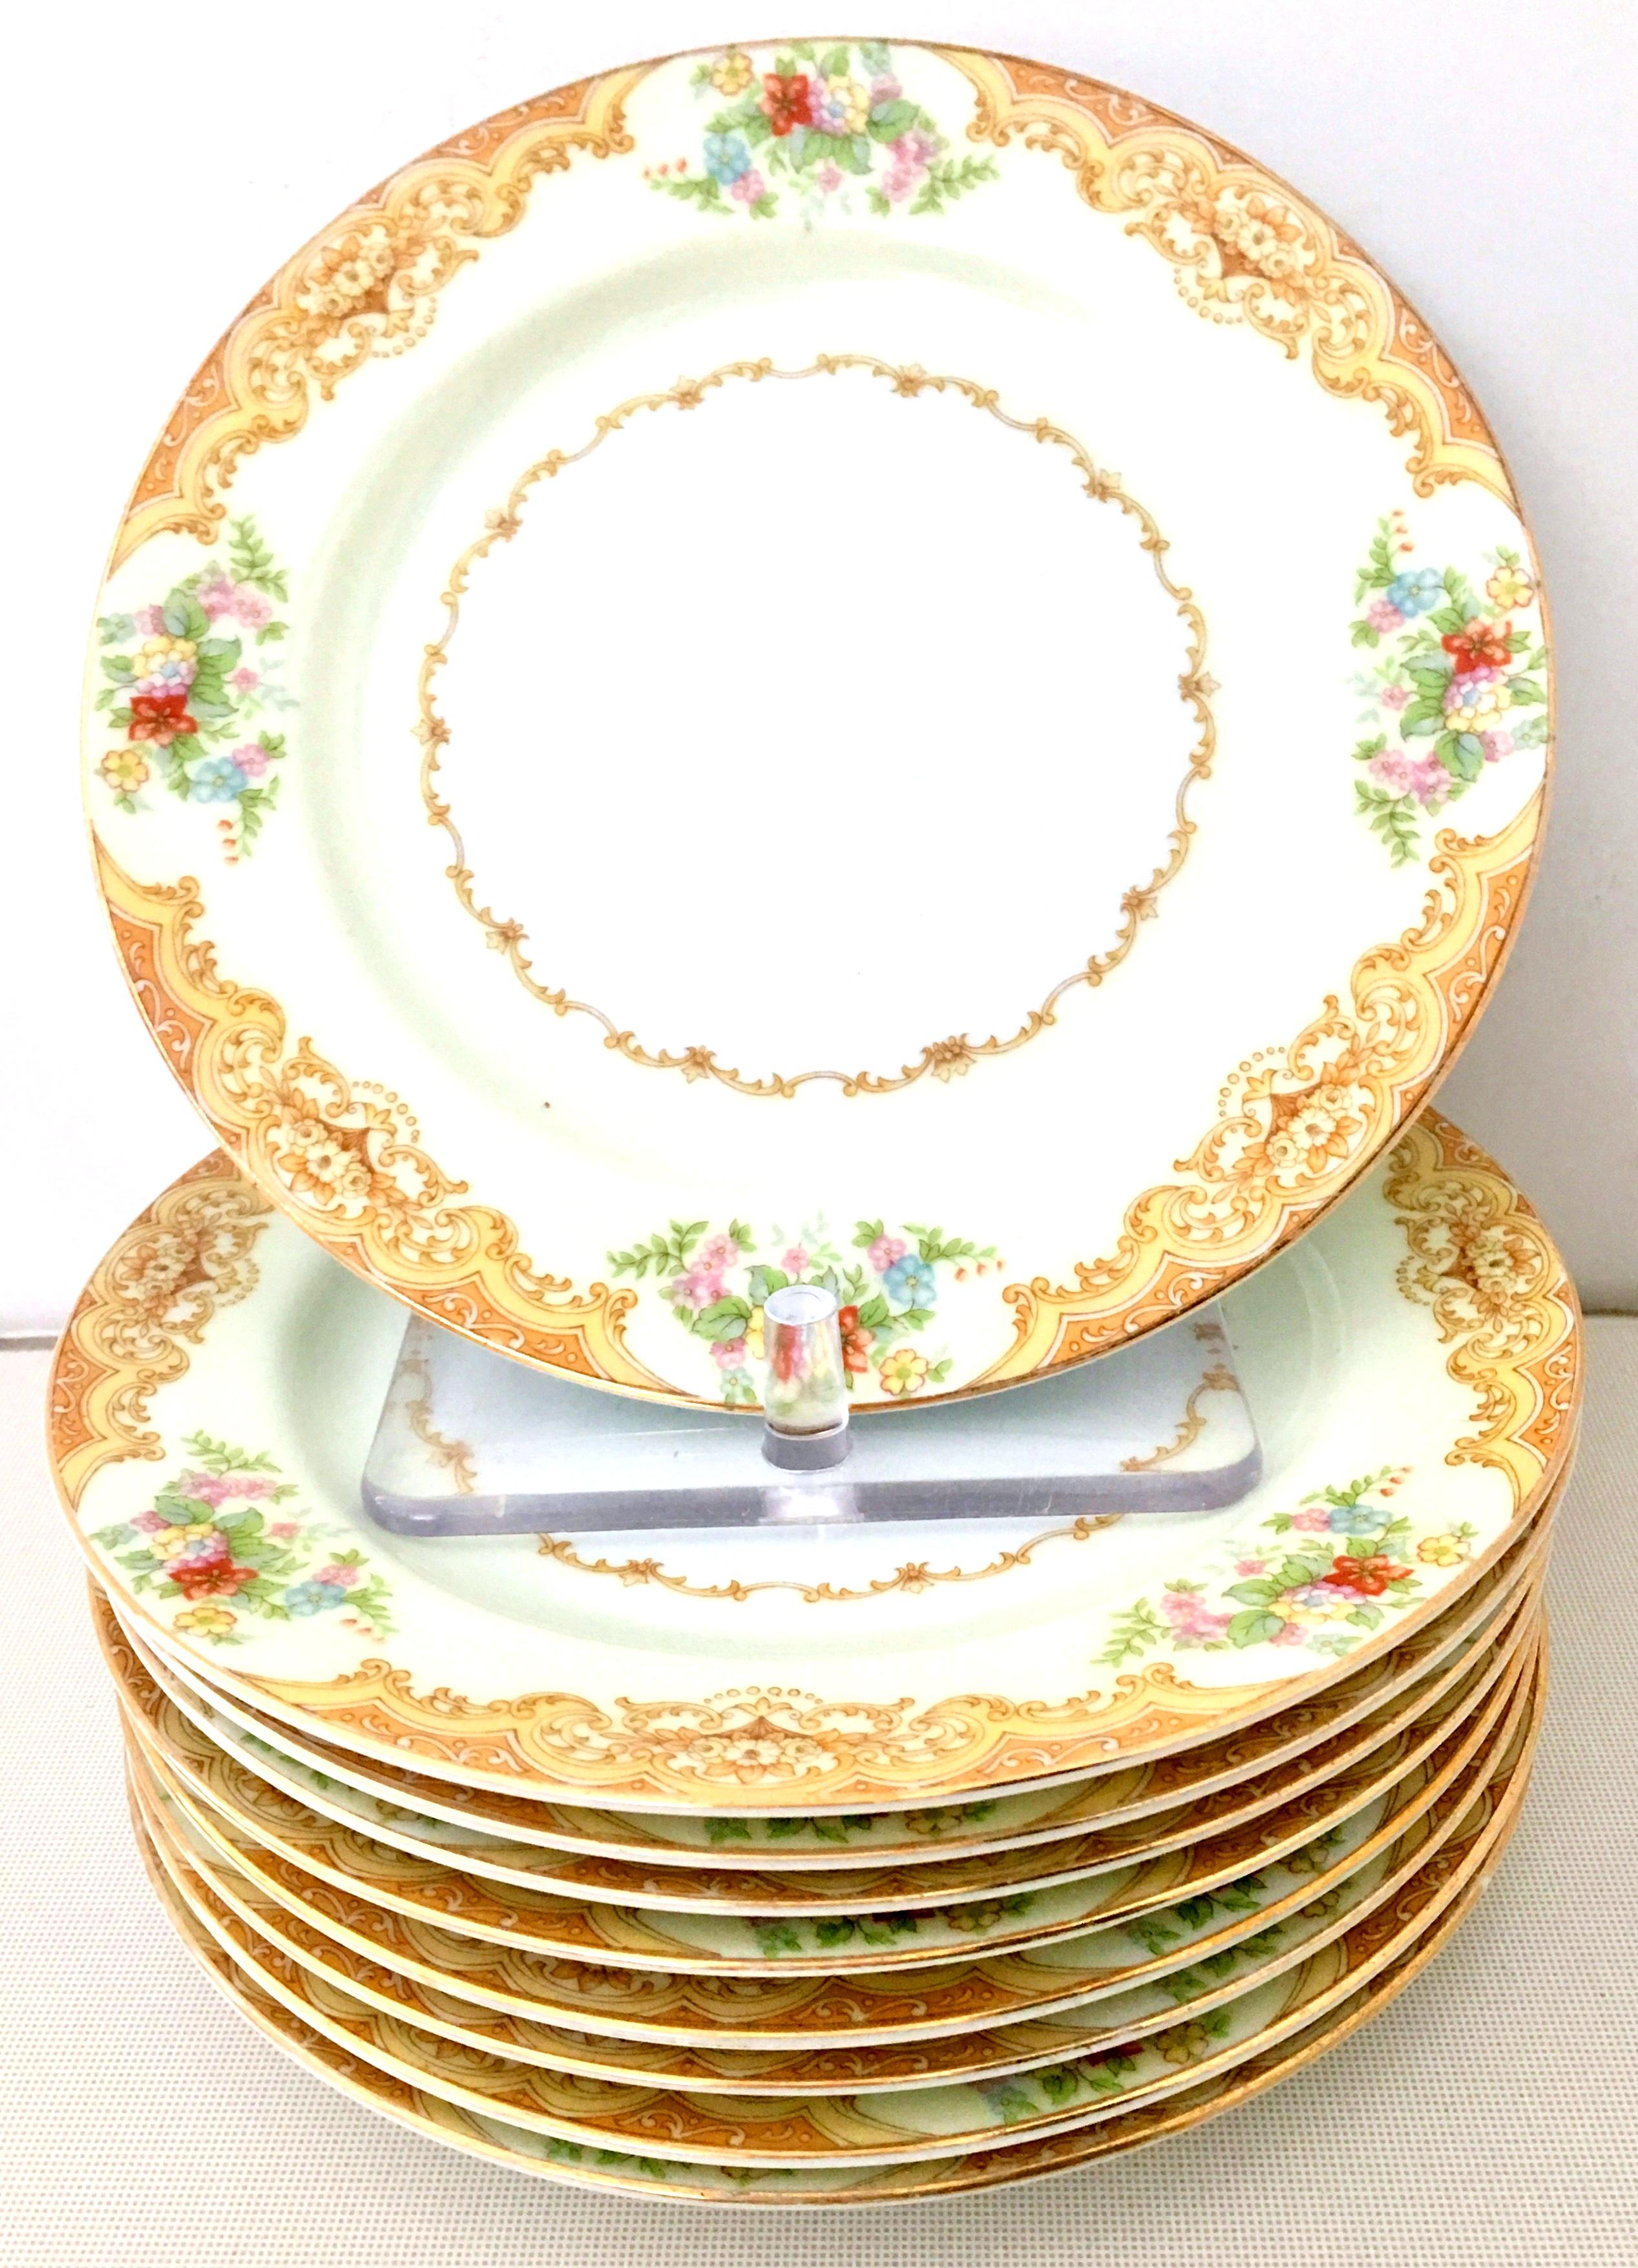 Art Nouveau hand painted Japanese porcelain set of nine salad/dessert plates by, Noritake-Morimura Brothers, 1930s. Pattern features a golden paisley and scroll rim pattern over a band of creamy yellow with a 22-karat gold edge detail. Each piece